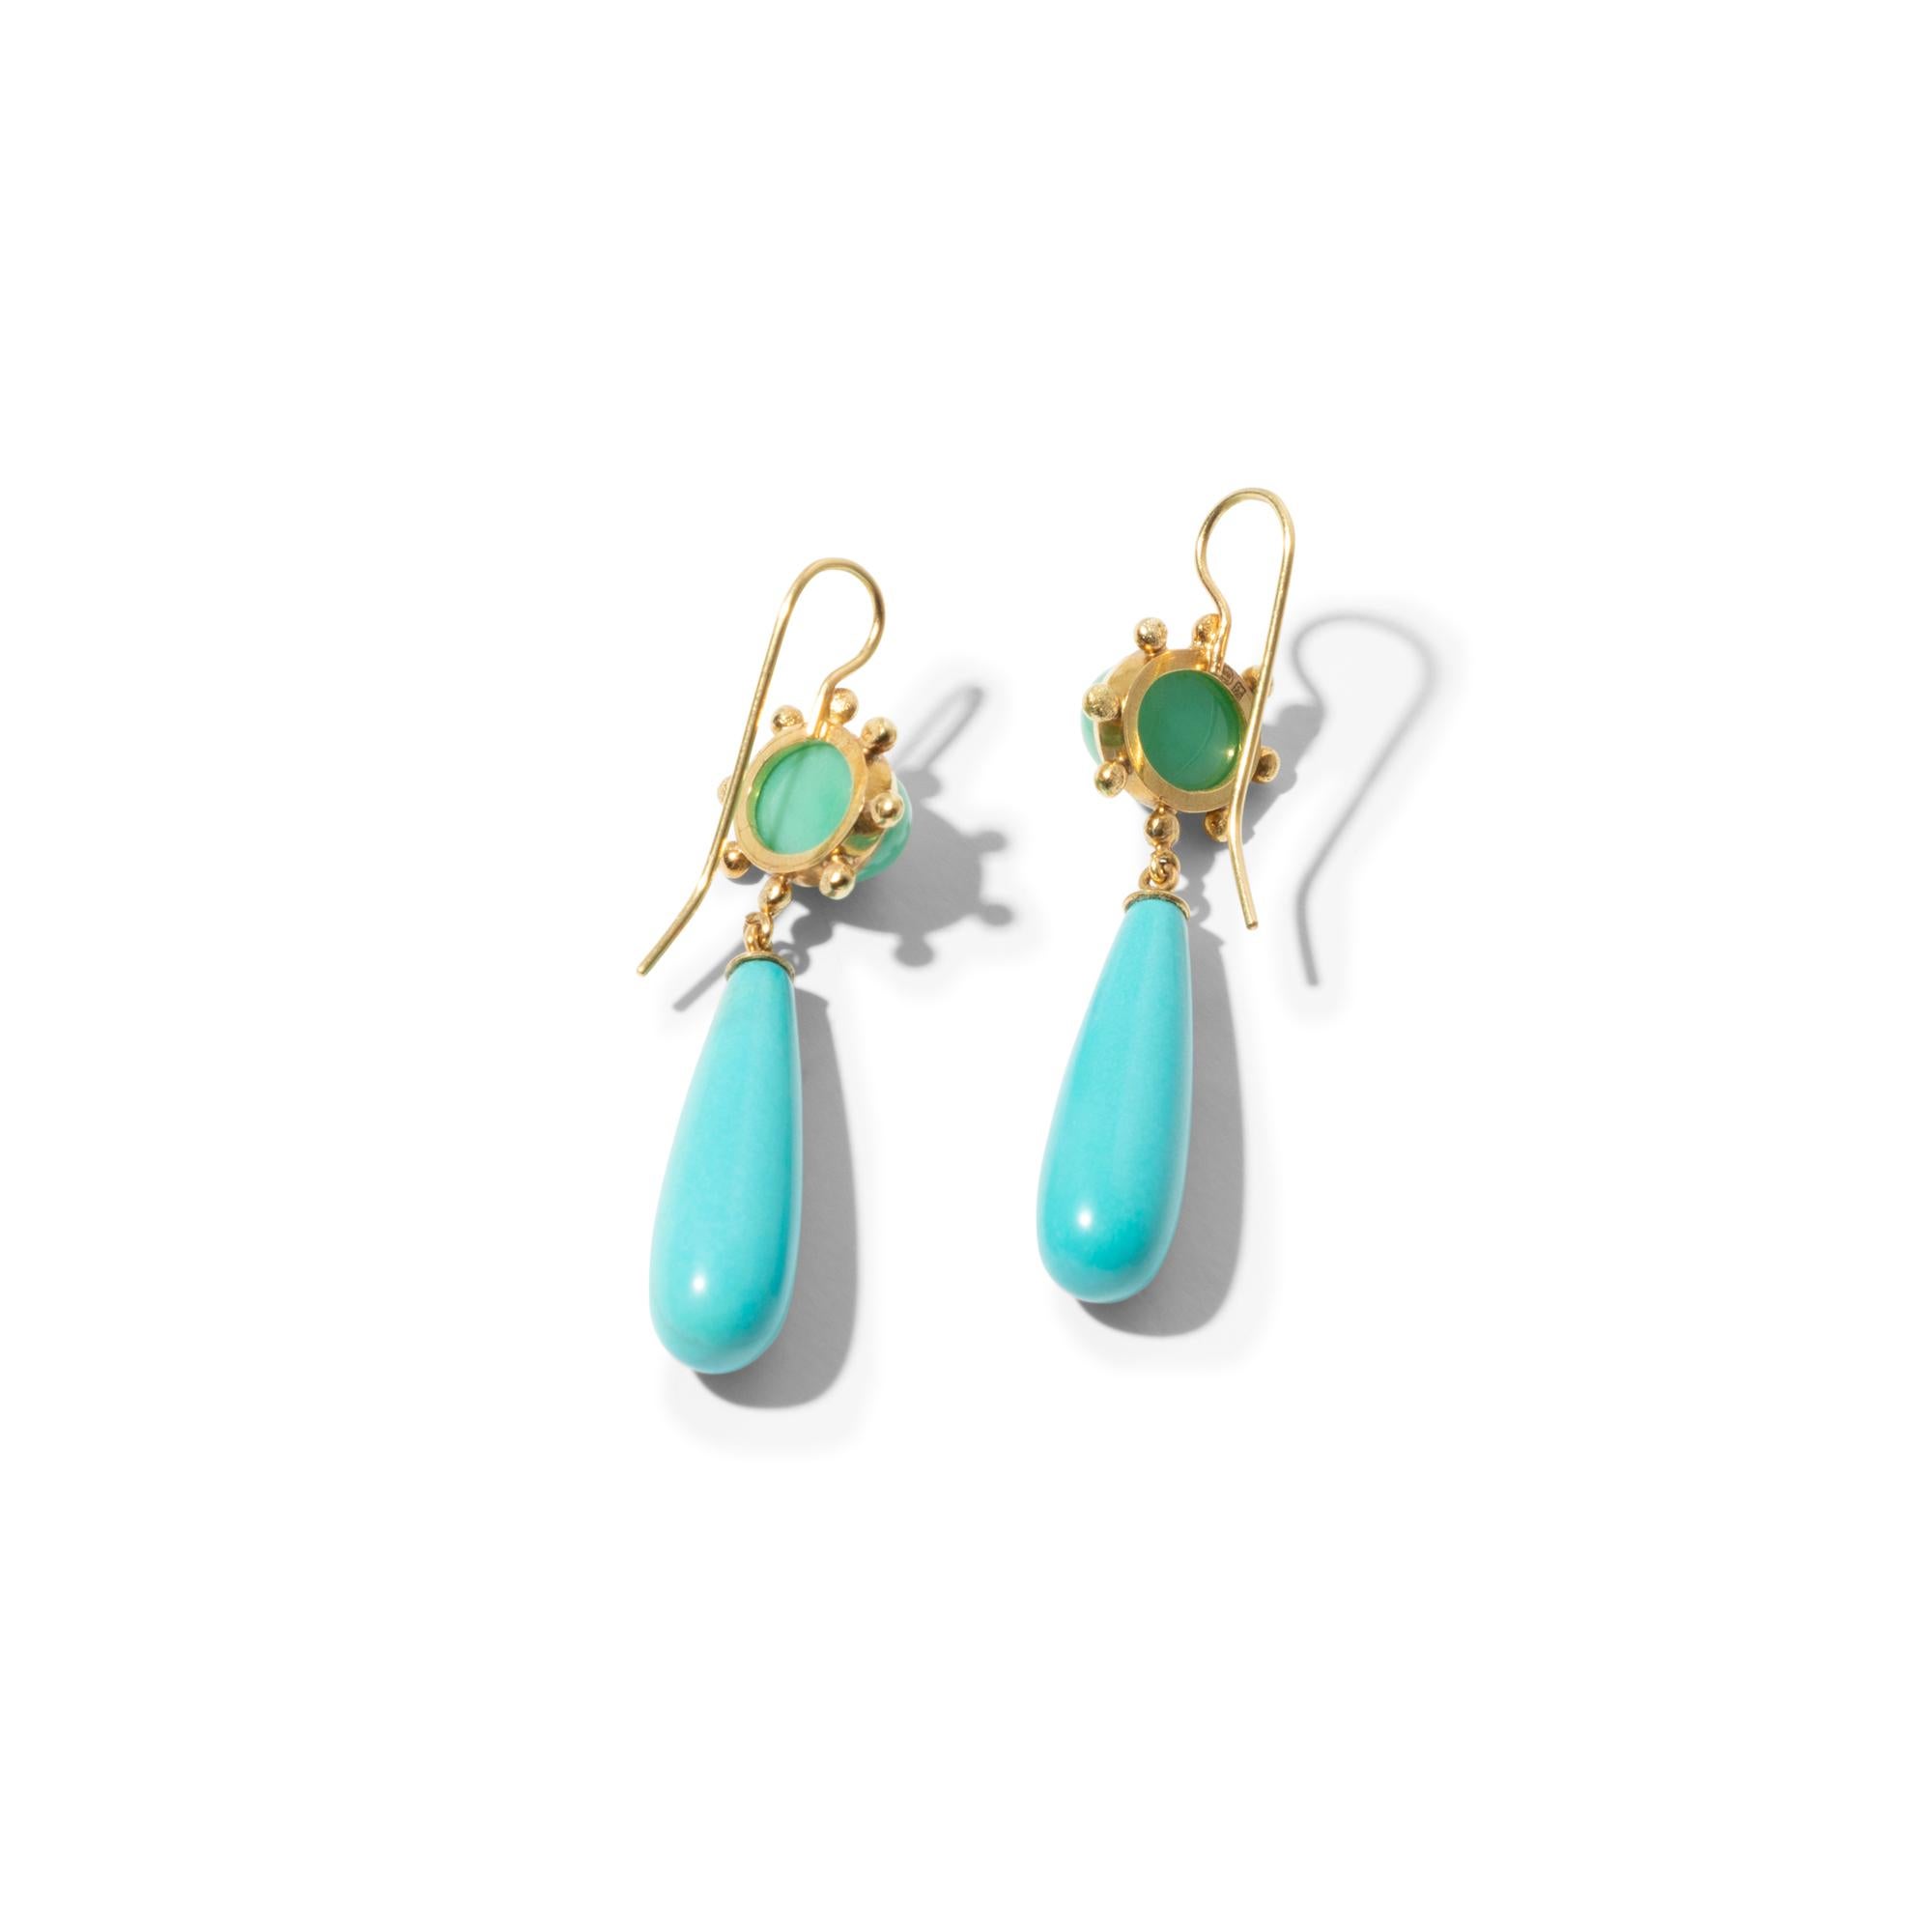 One-of-a-kind and handcrafted pair of earrings in 18k gold using a bold colour combination of mint green chrysoprase cabochons and long turquoise drops.  Youthful and fresh, the perfect set for spring and summer, or to brighten up a grey day. 